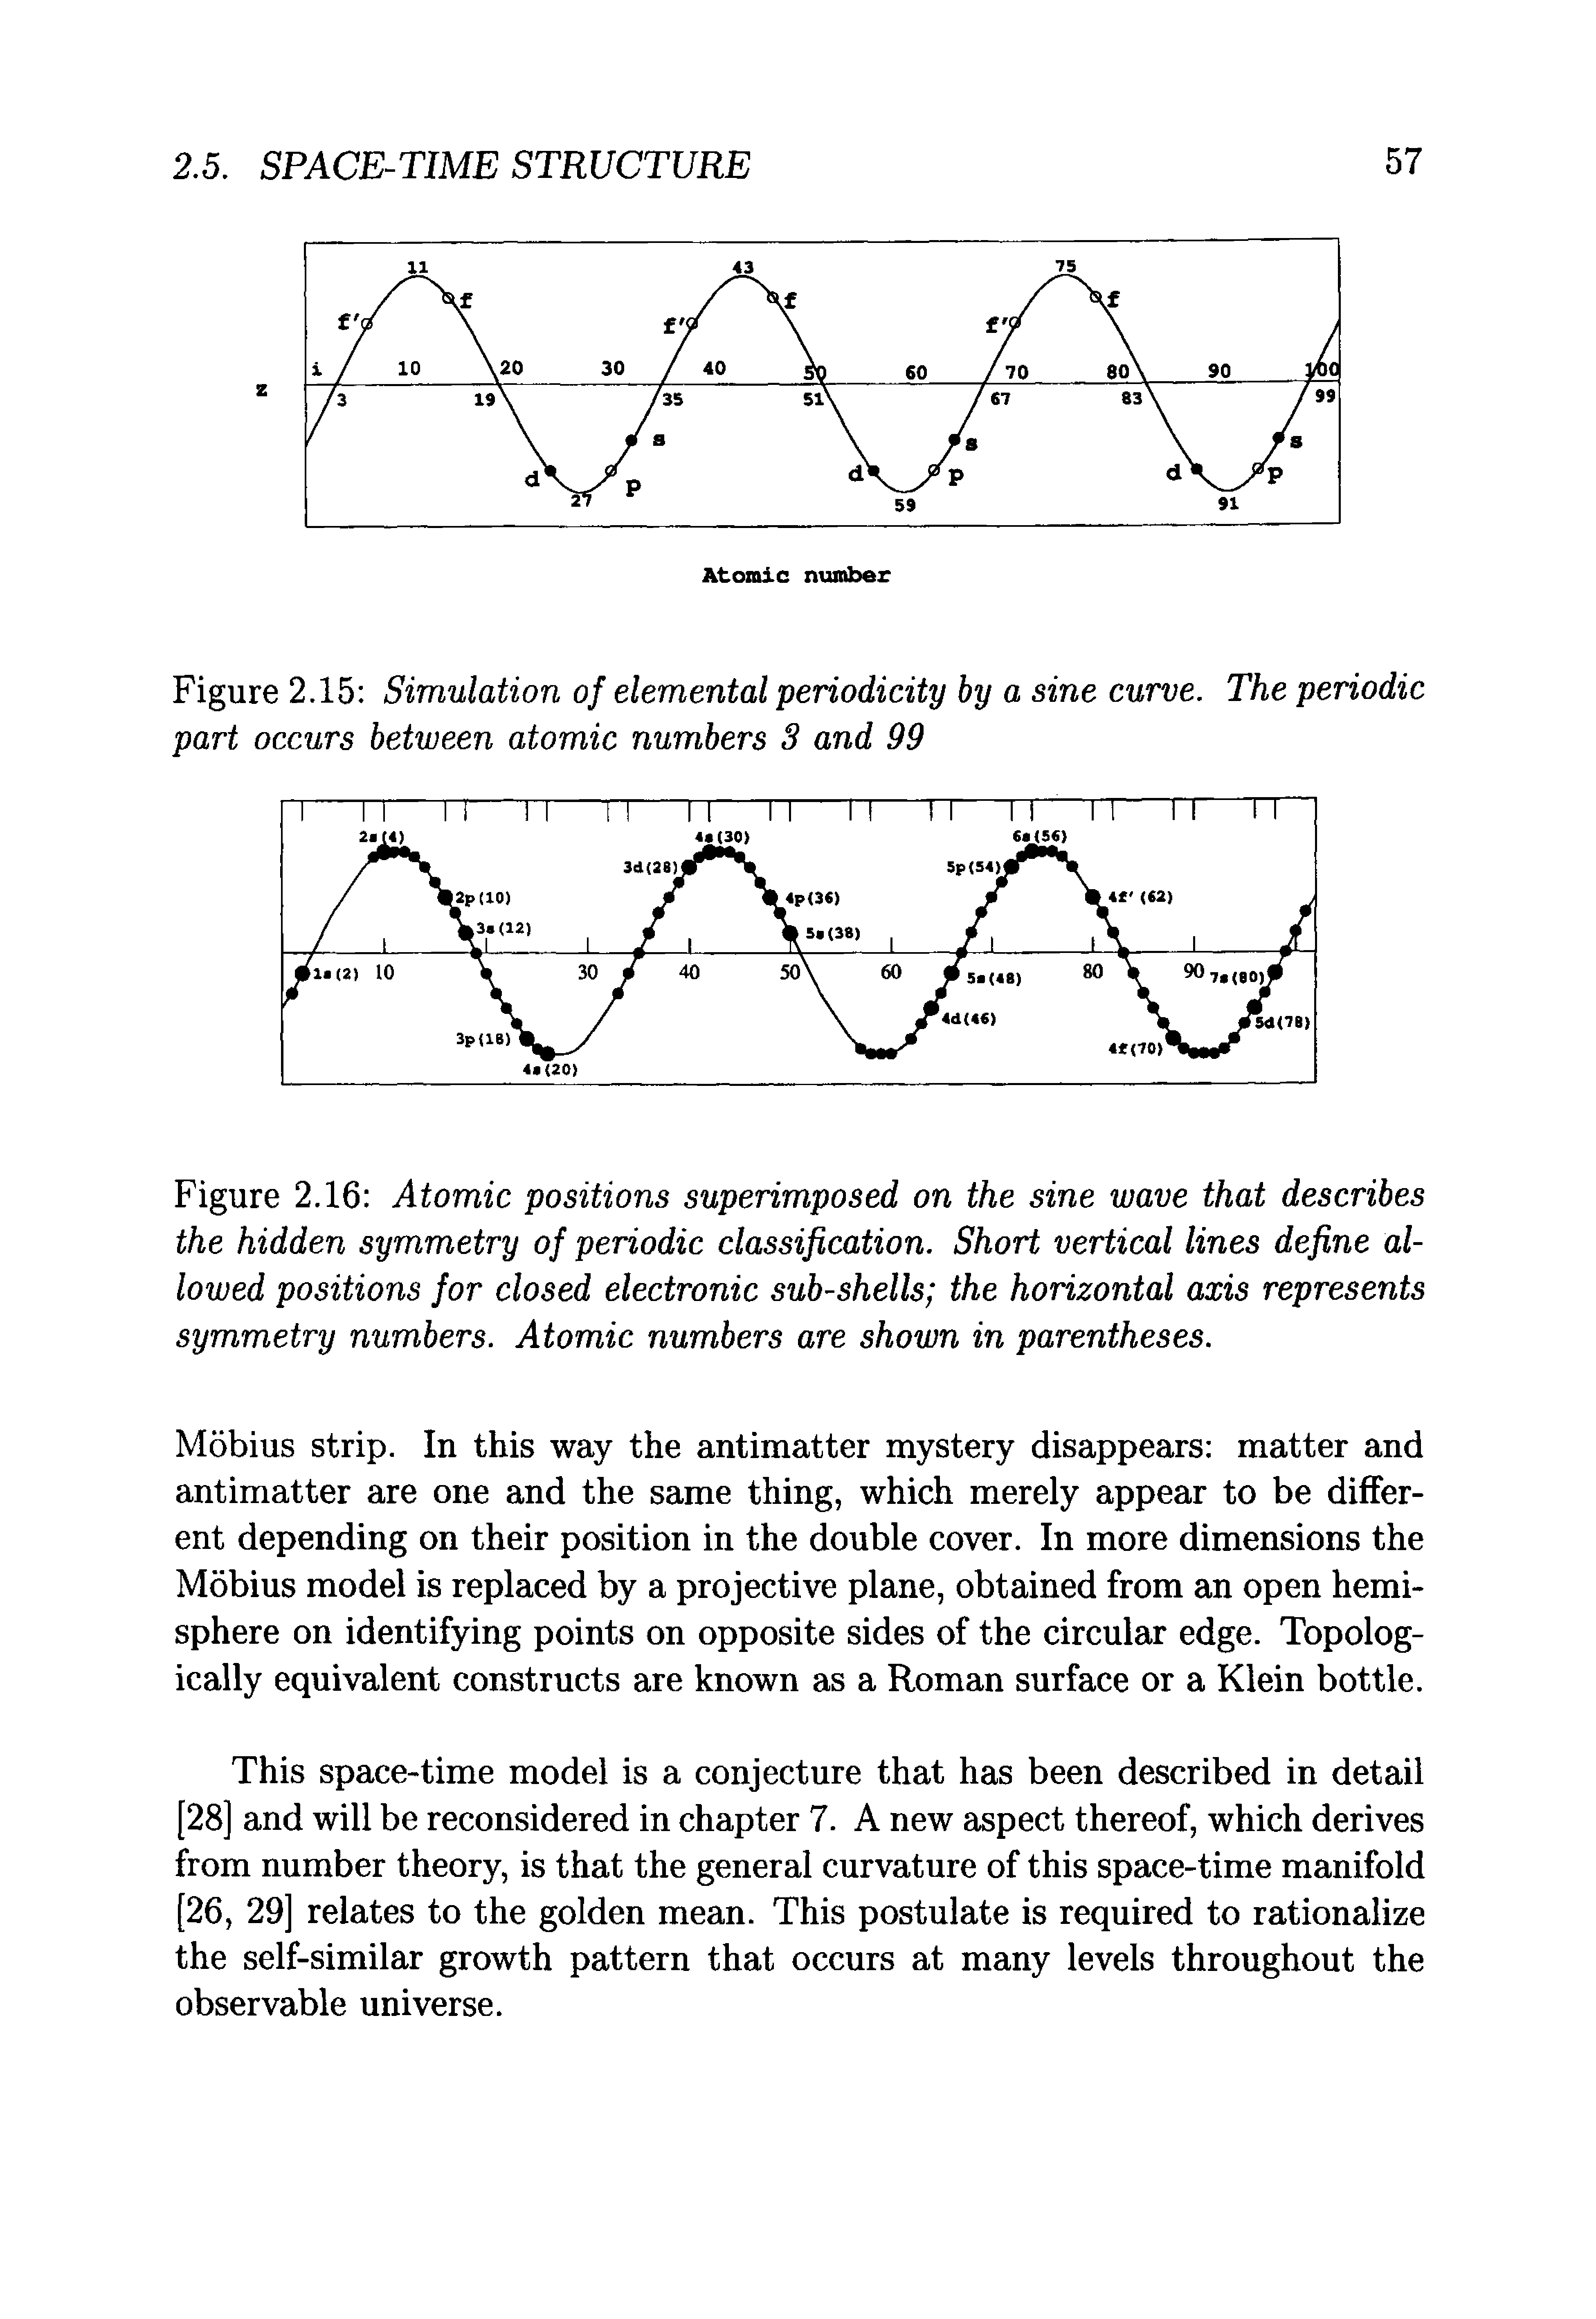 Figure 2.16 Atomic positions superimposed on the sine wave that describes the hidden symmetry of periodic classification. Short vertical lines define allowed positions for closed electronic sub-shells the horizontal axis represents symmetry numbers. Atomic numbers are shown in parentheses.